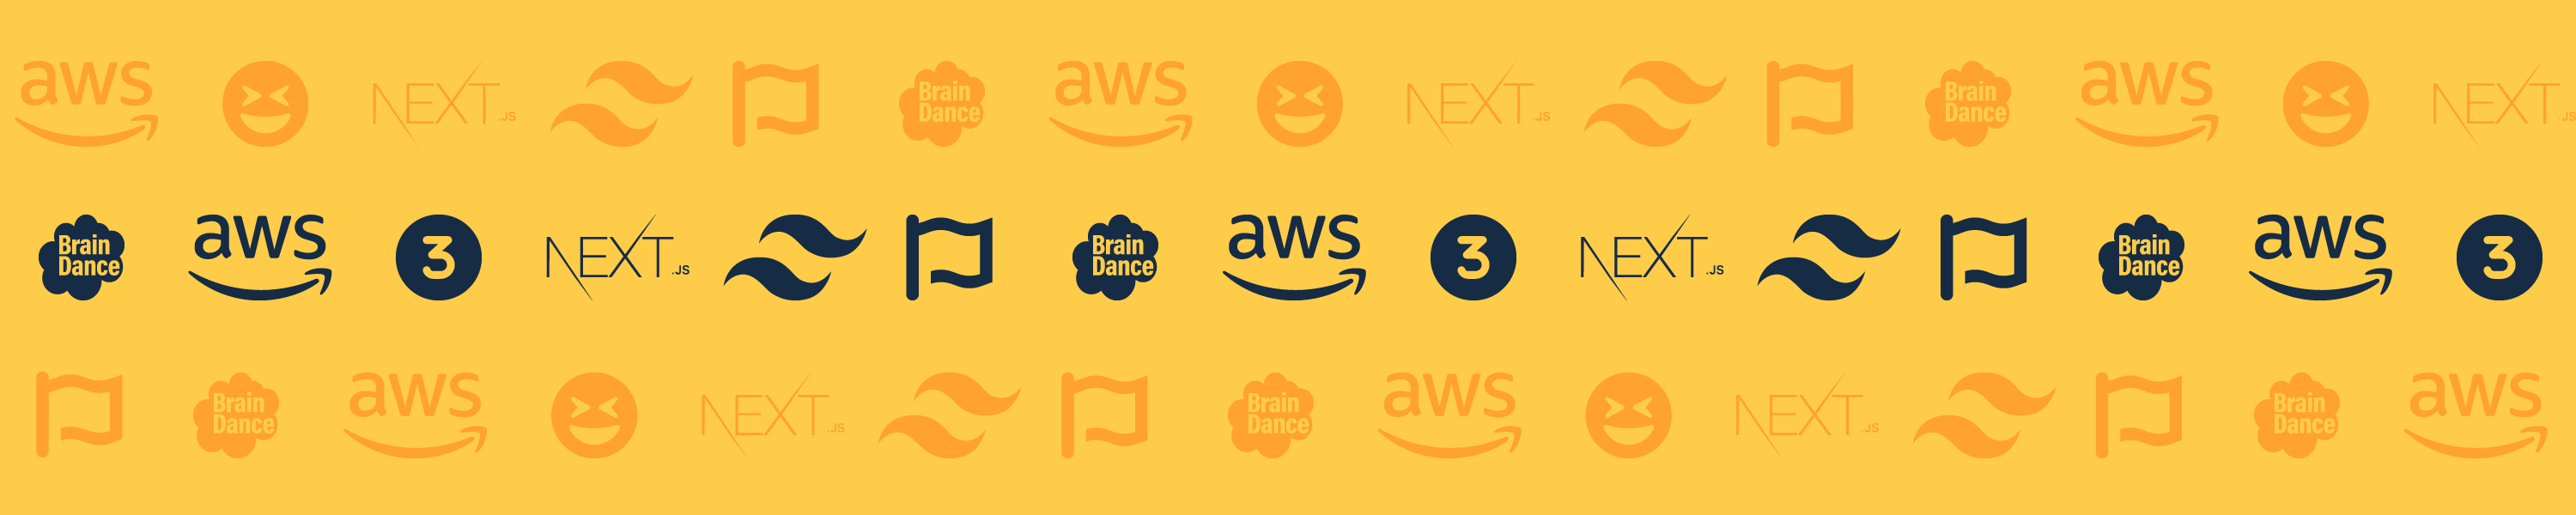 Font Awesome, AWS, React and Nextjs logo banner